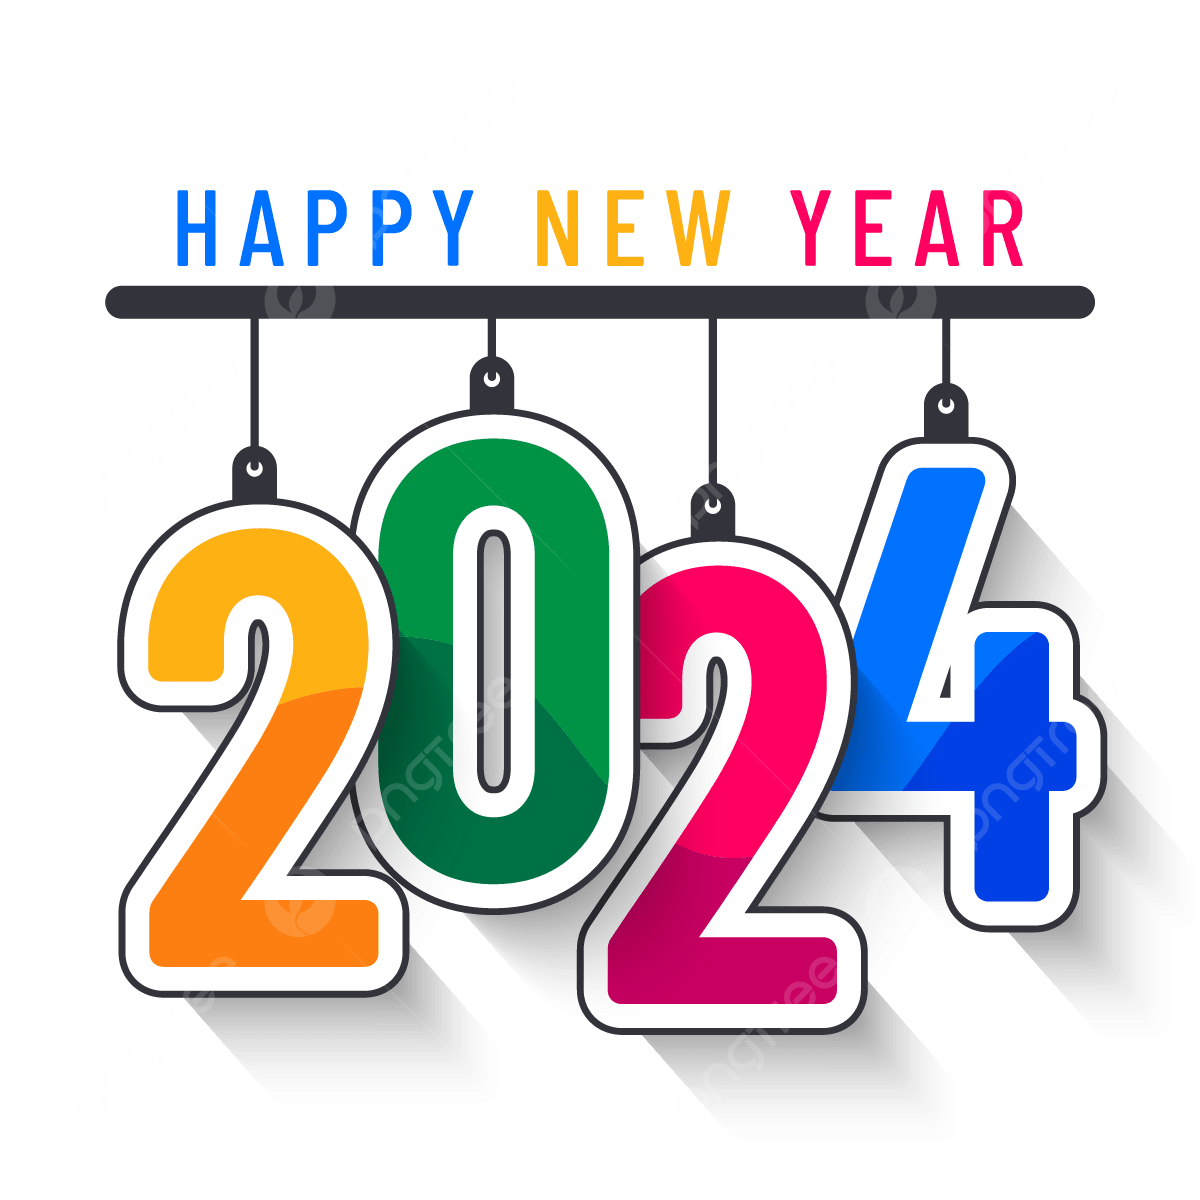 https://clubrunner.blob.core.windows.net/00000000257/Images/Happy-New-Year-2024.png